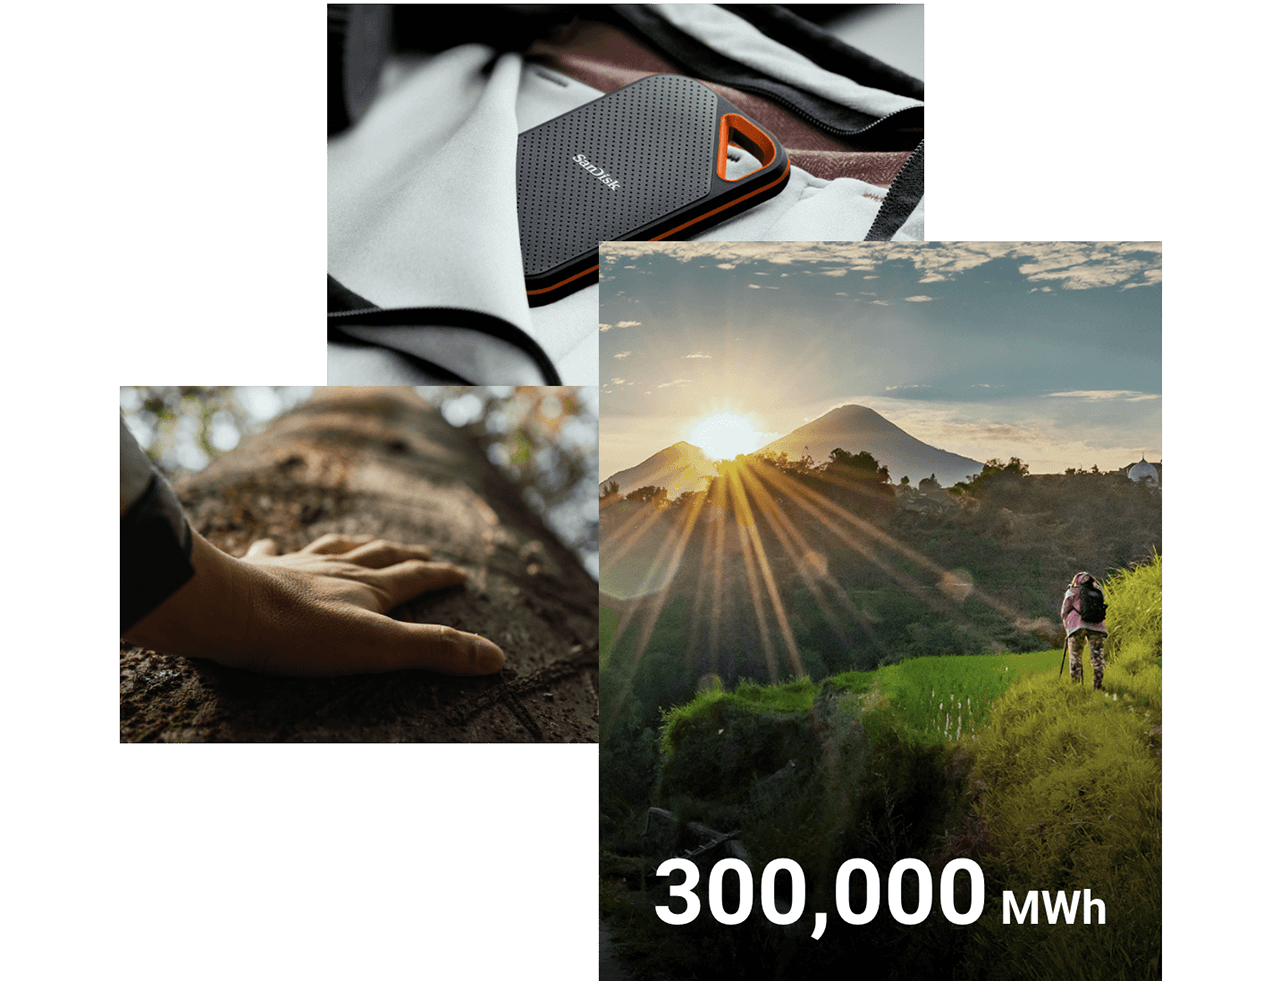 300,000 MWh of product-level power savings